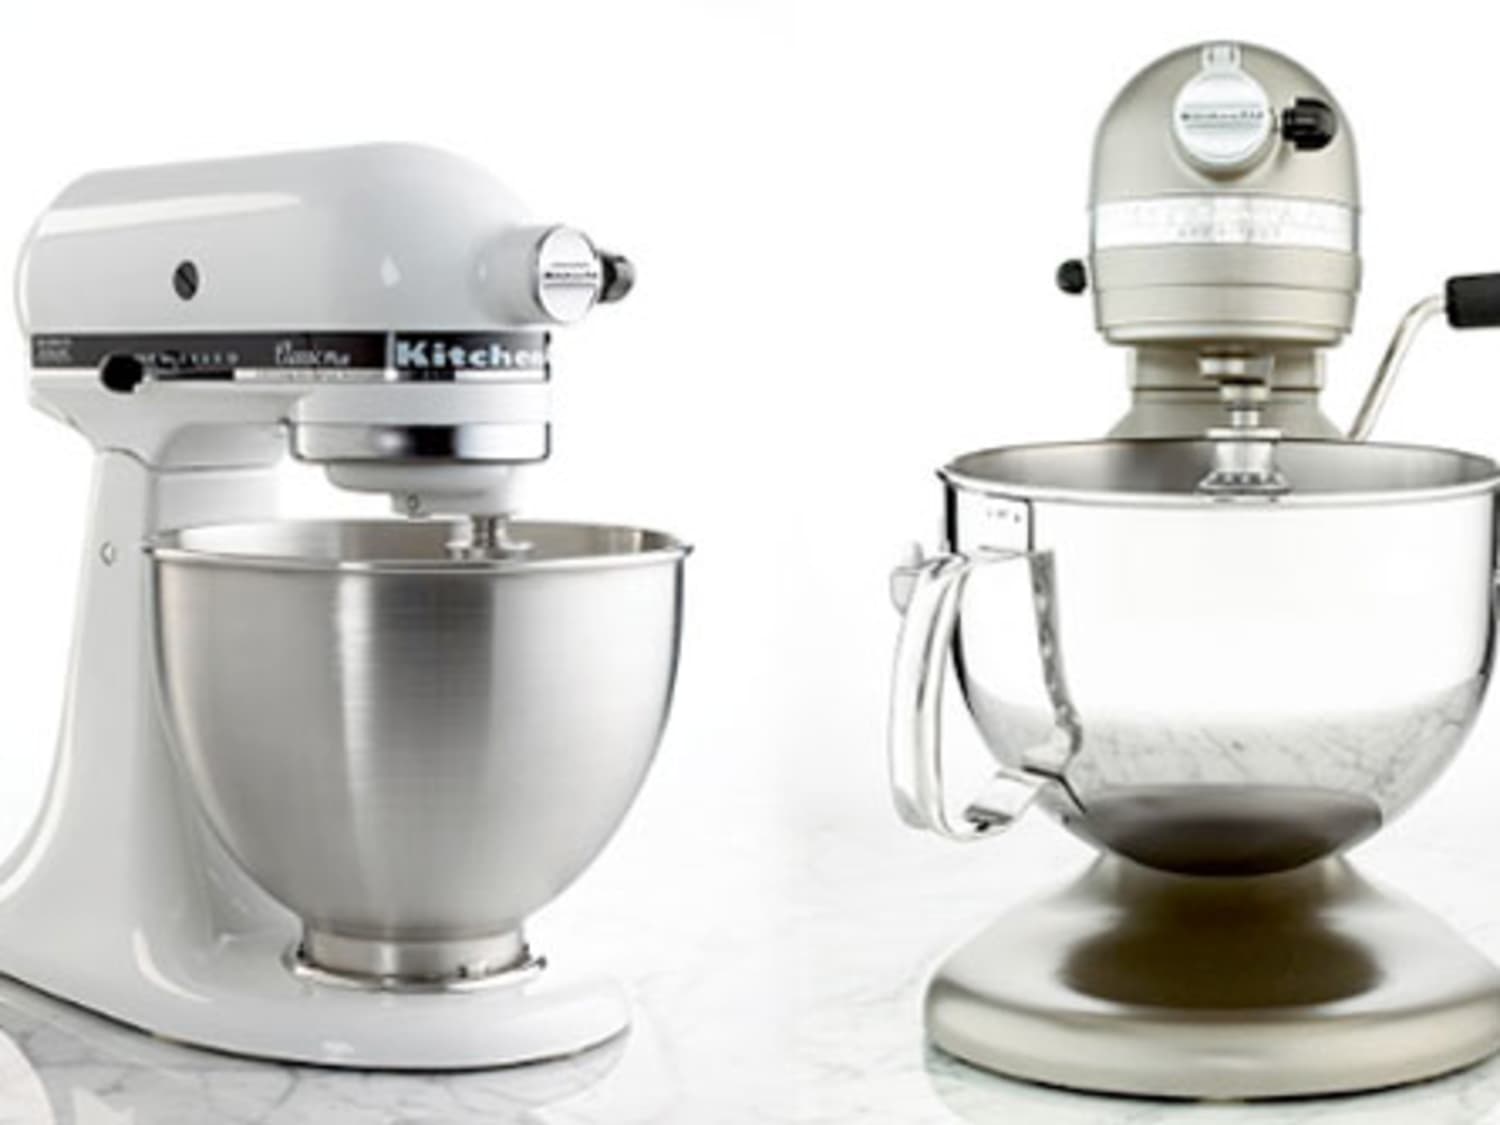 KitchenAid Tilt Head vs Bowl-Lift Stand Mixer: The Pros and Cons of